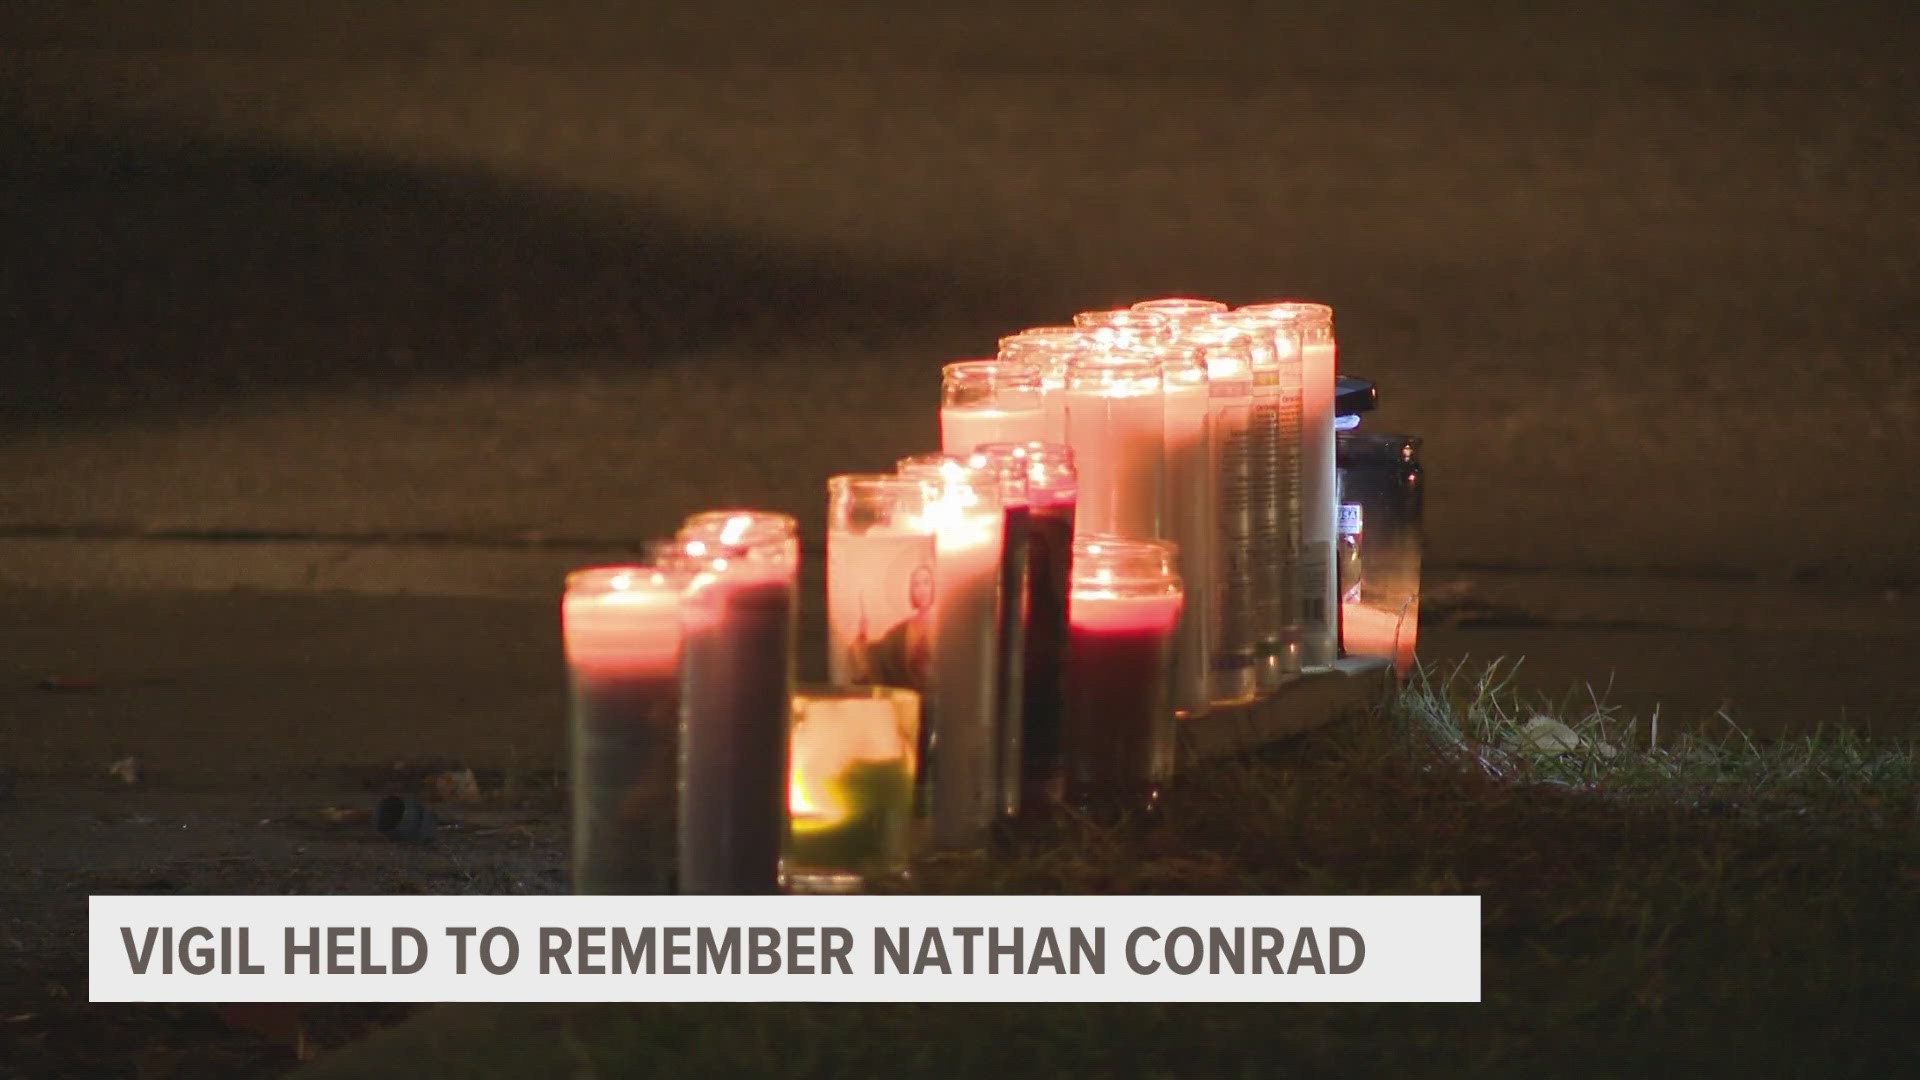 Nathan Conrad, 38, is being remembered as an amazing father, brother, uncle and friend by his wife. She says he didn't deserve what happened to him.